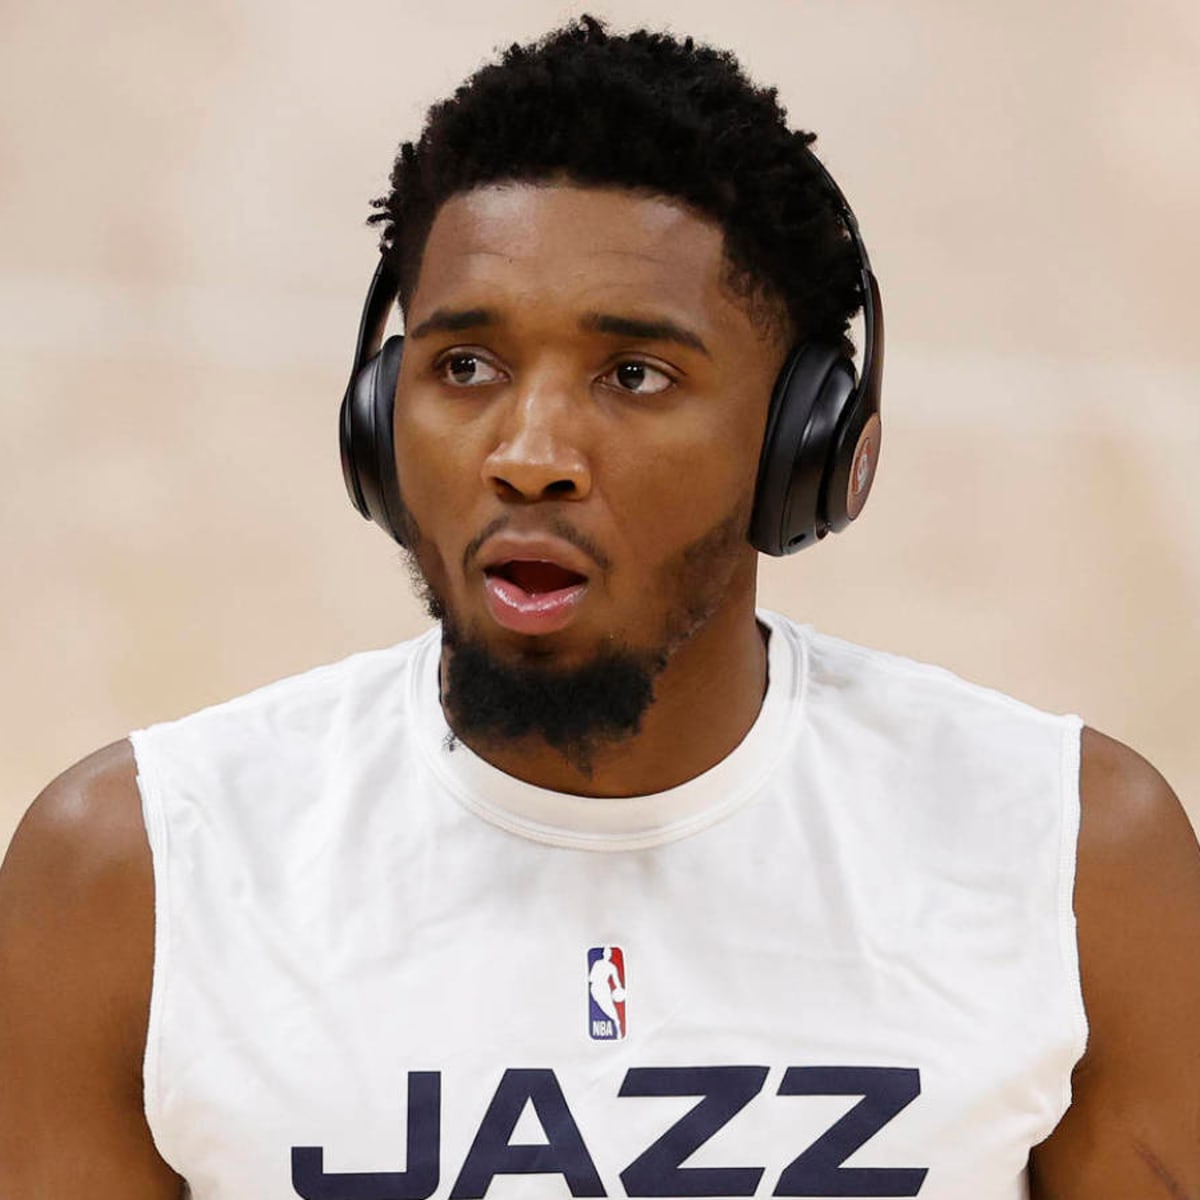 Jazz rally past Clippers in Game 1, Donovan Mitchell scores 45 points